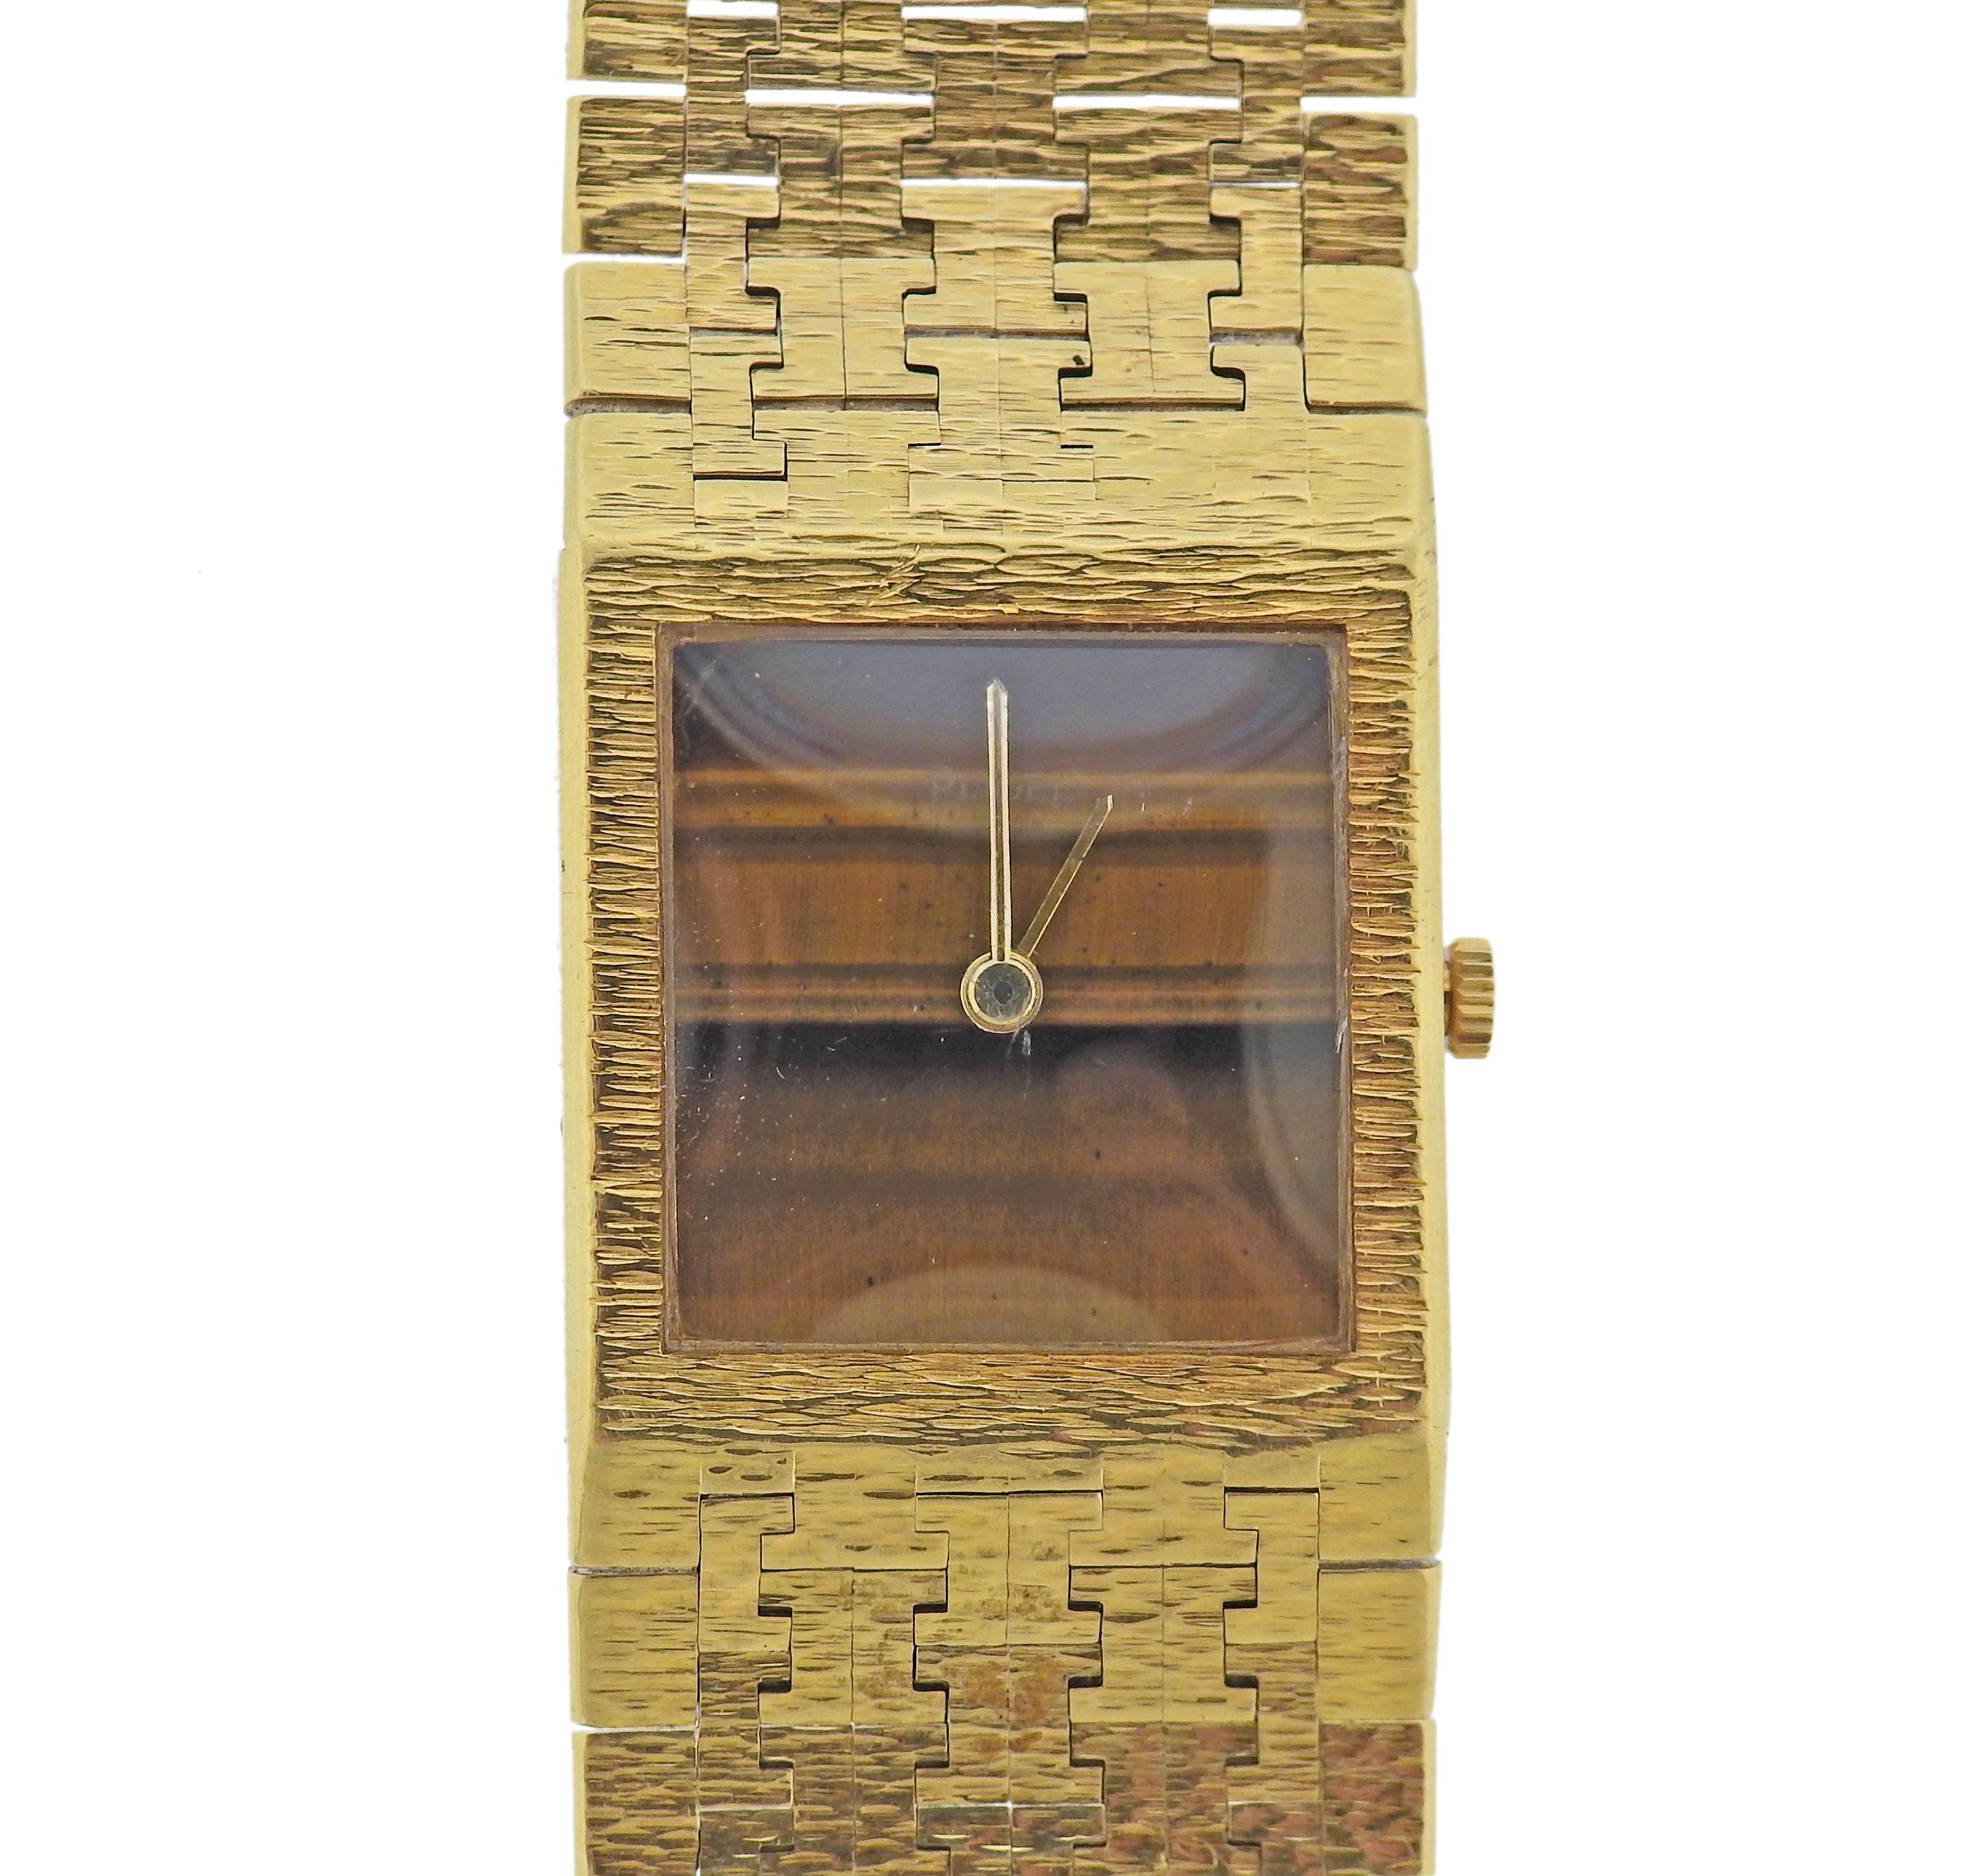 Vintage circa 1970s, Piaget watch, in 18k gold, with tiger's eye dial. Quartz movement. Case - 23mm x 25mm. Bracelet is 7 1/8